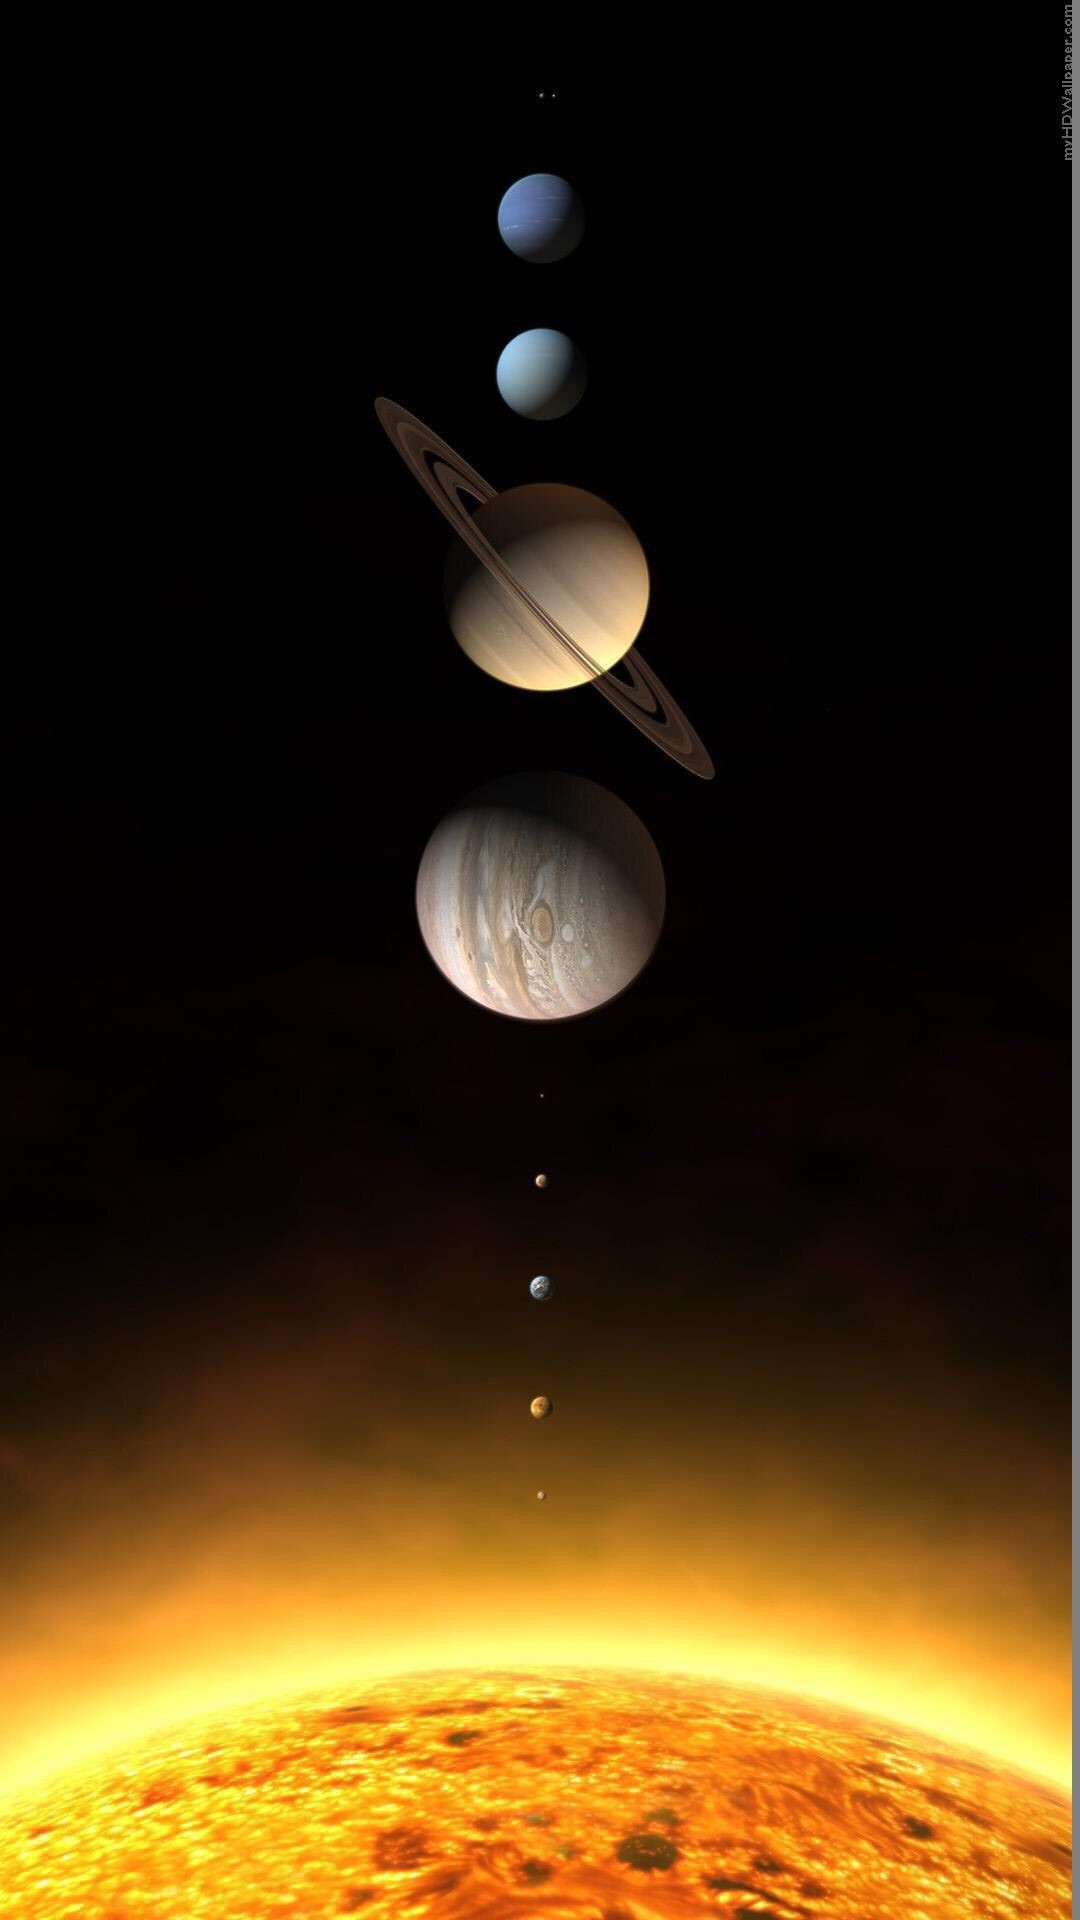 1080x1920 Our solar system in order from the sun